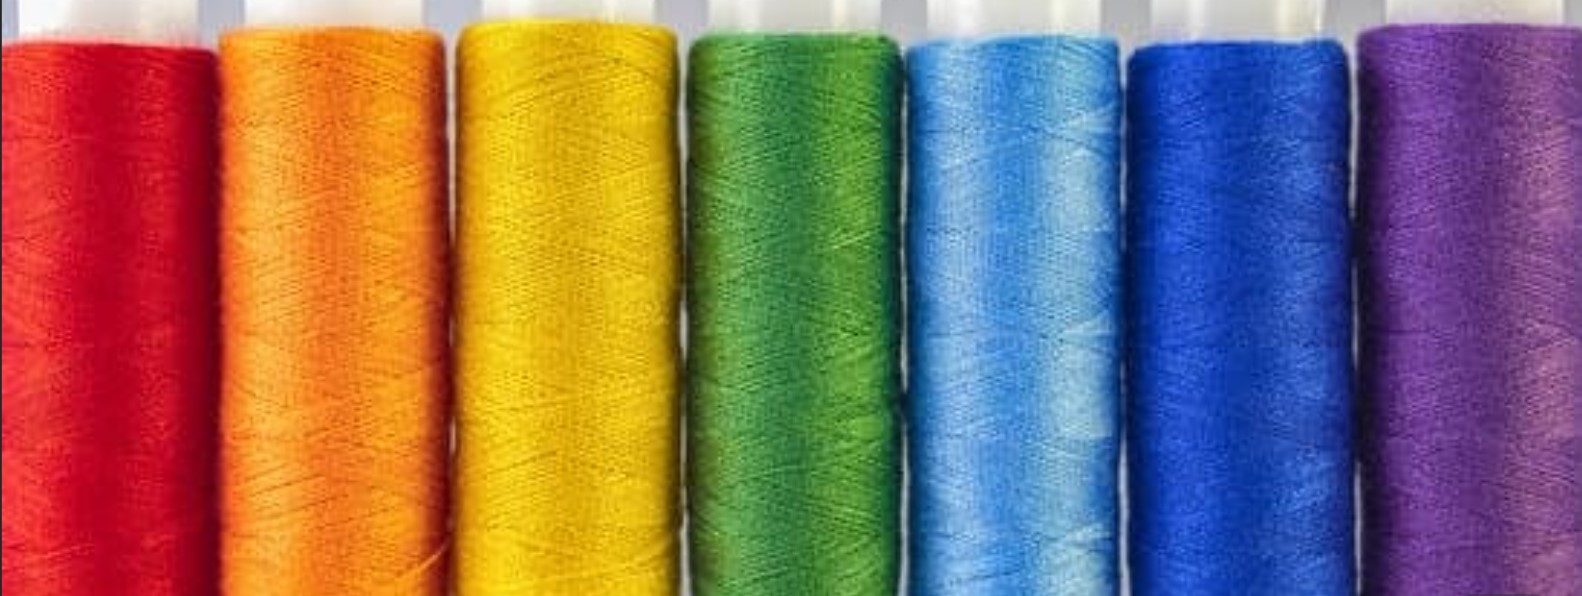 Multiple colors of yarn in a row